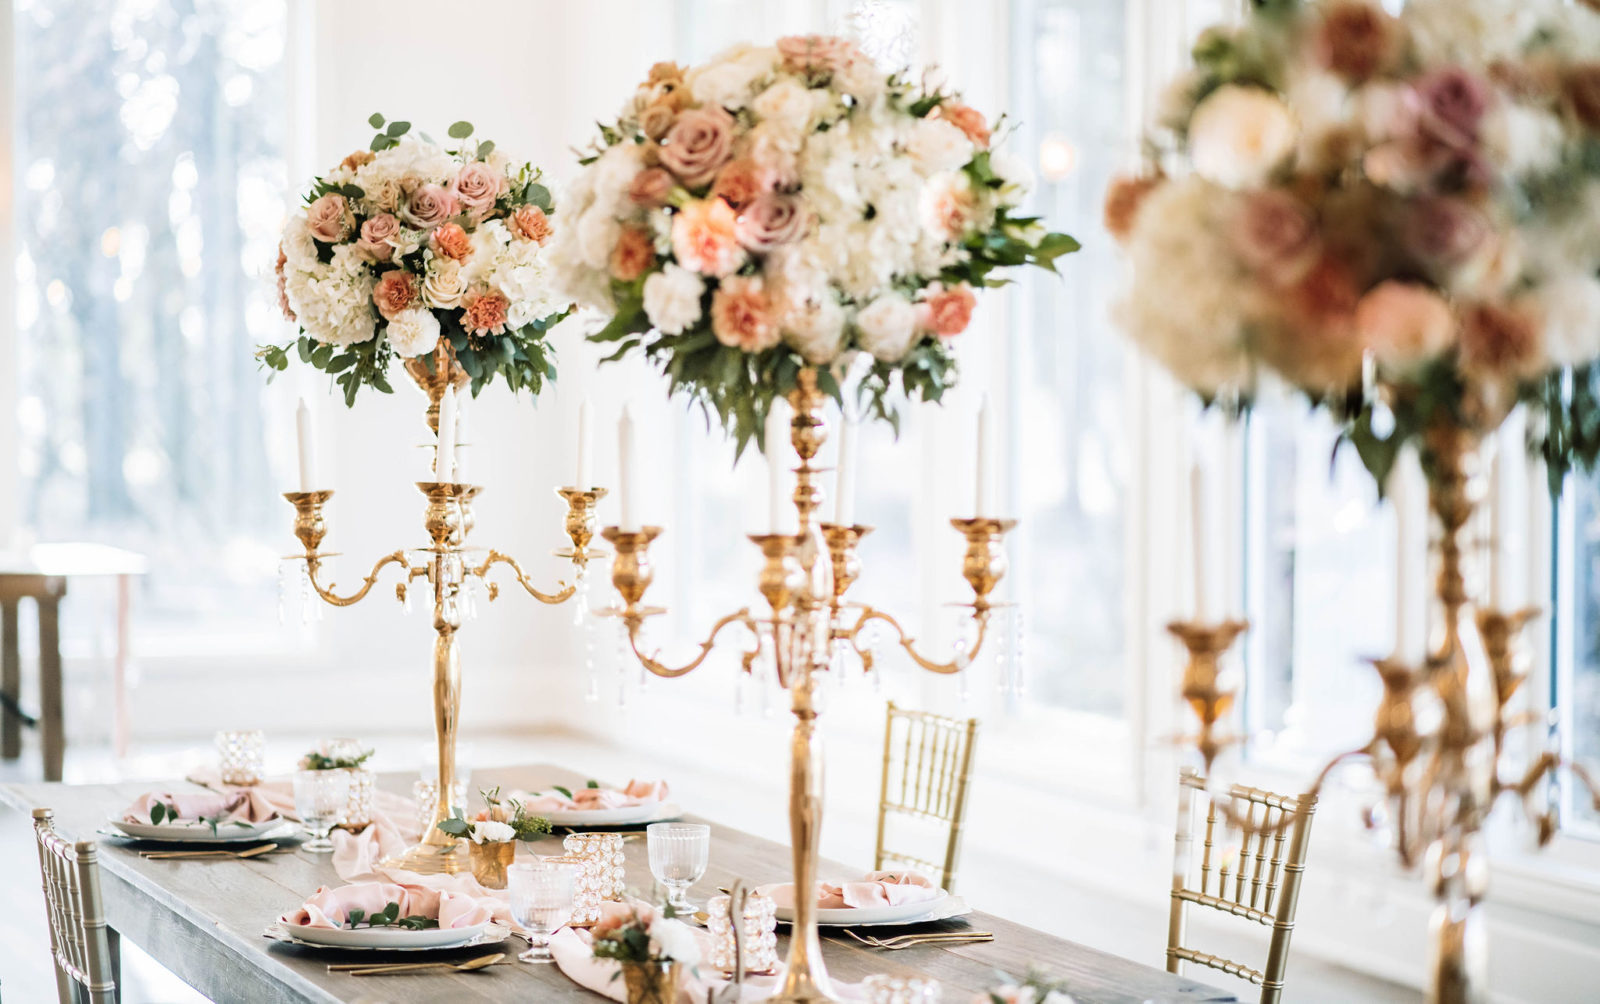 Enchanting ballroom wedding decor inspiration with gold candelabras with stunning floral arrangments